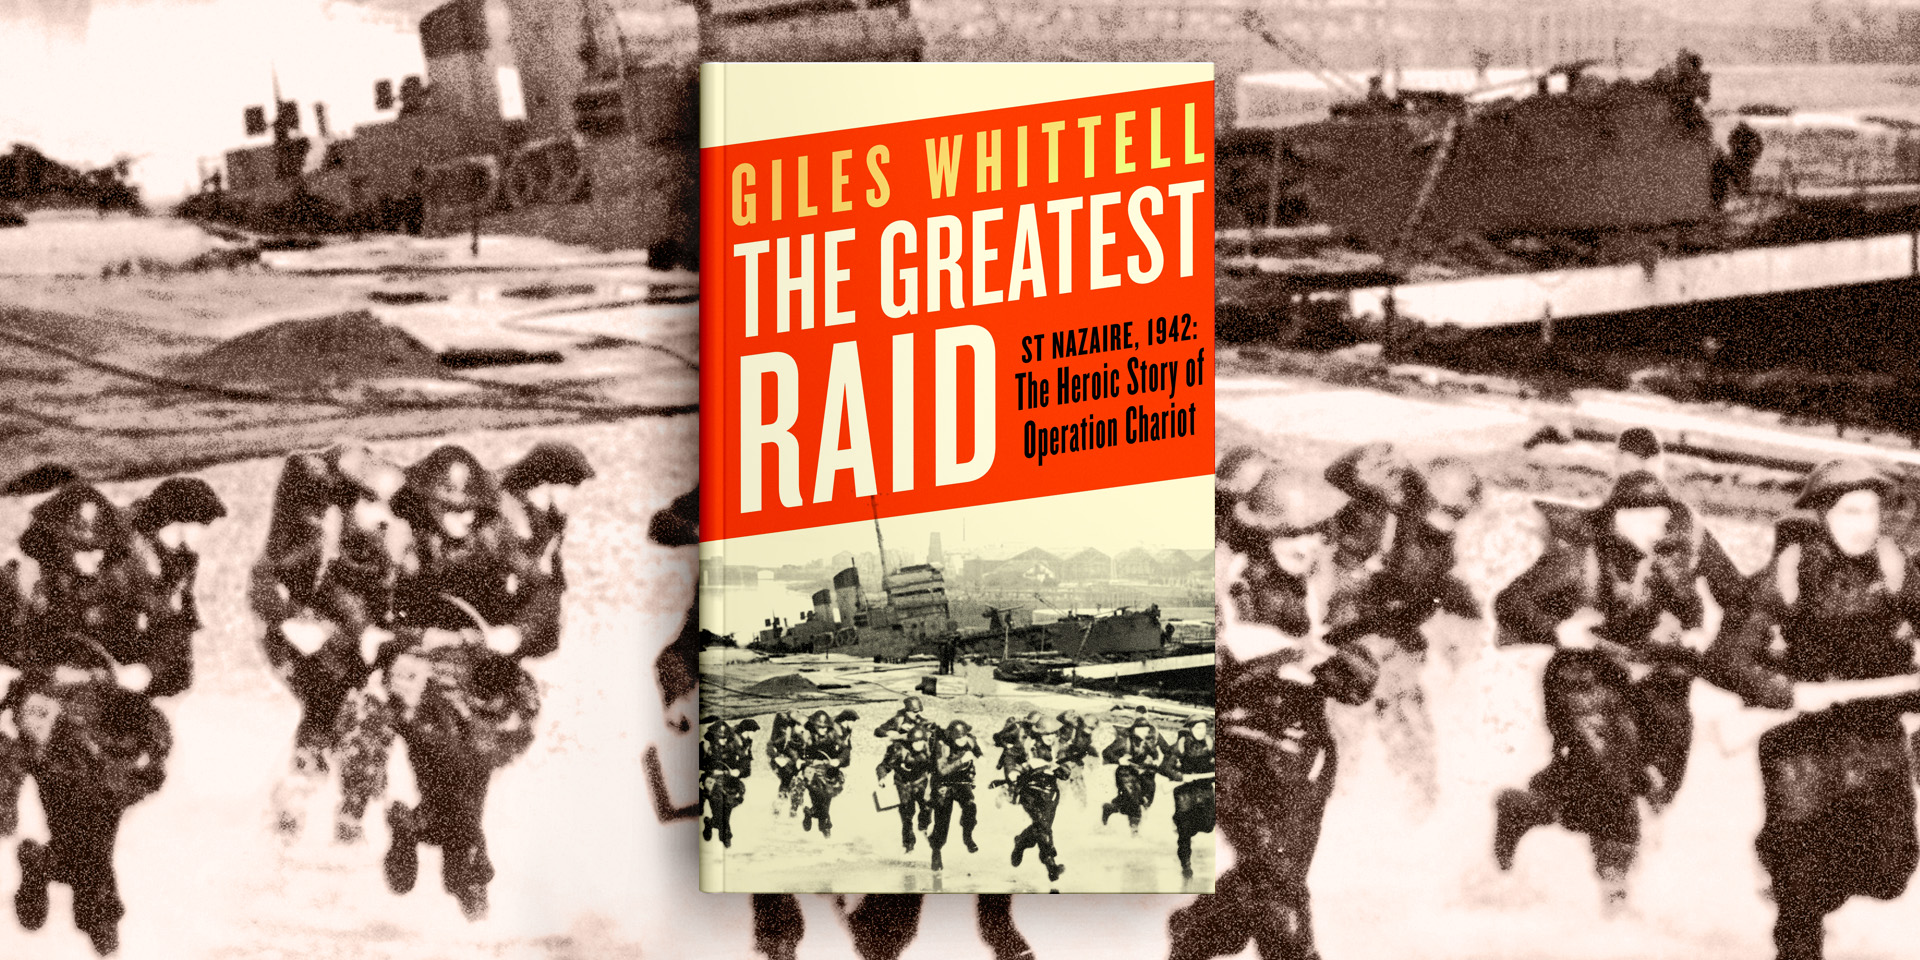 The Greatest Raid St Nazaire The Heroic Story of Operation Chariot 1942 